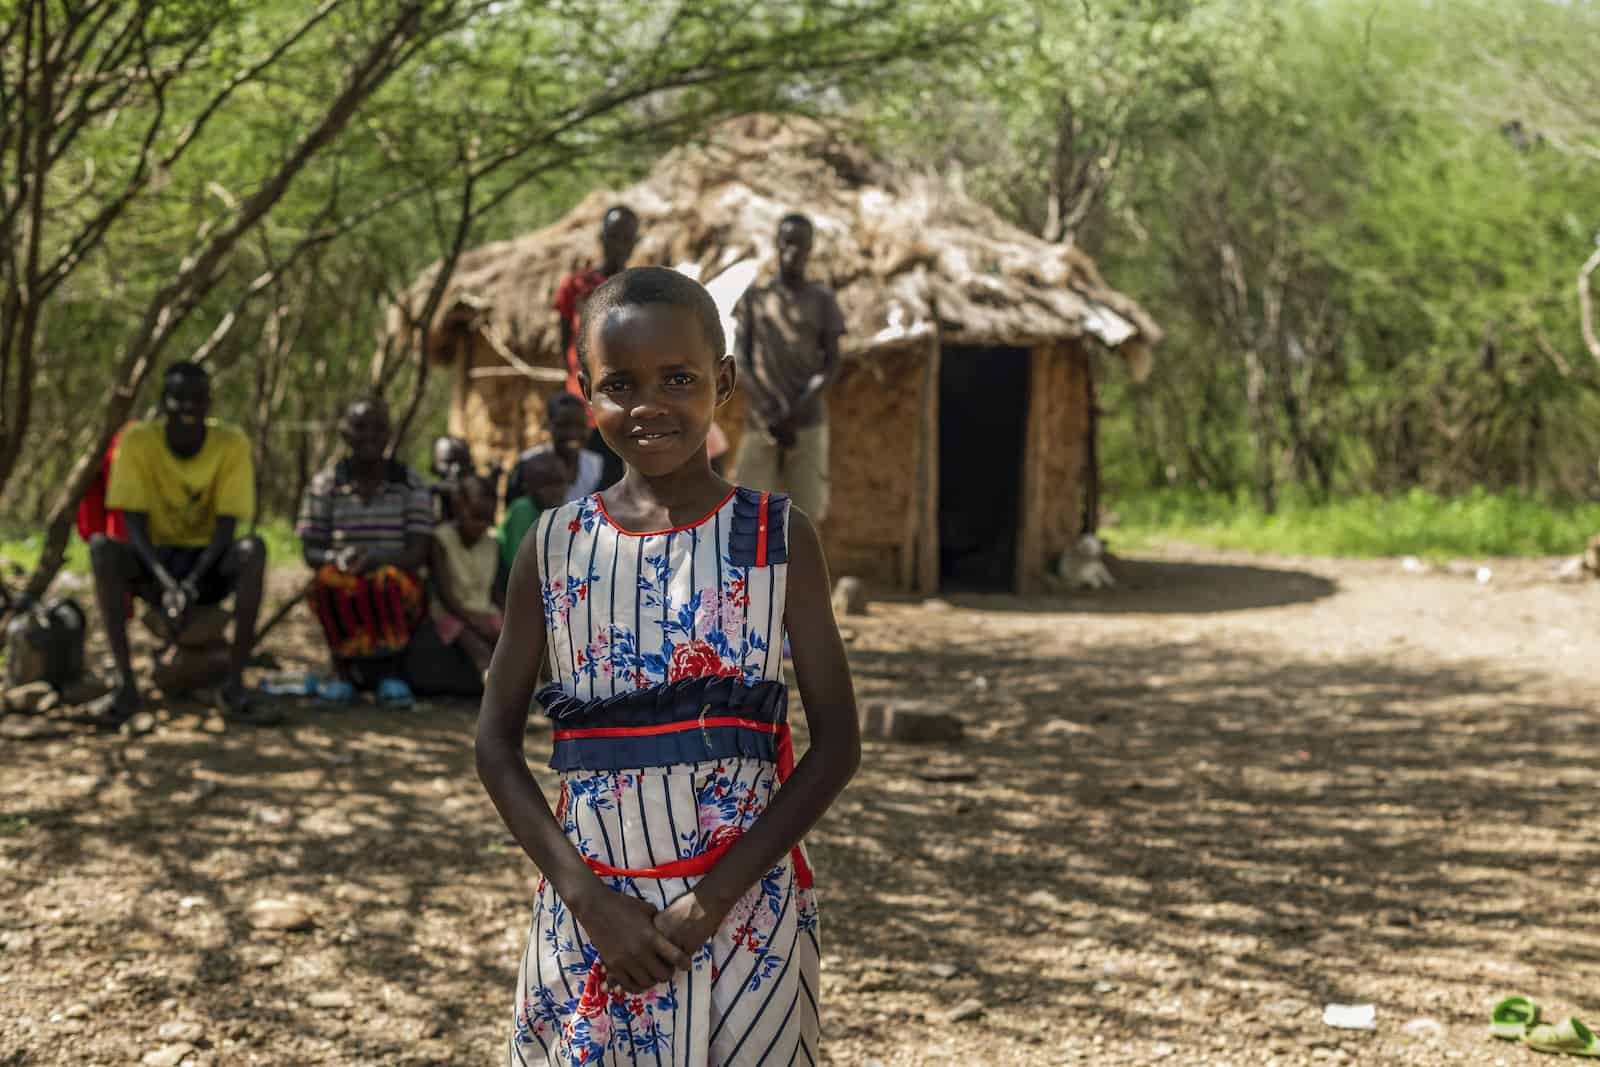 A young girl stands in front of a grass thatched hut with her family sitting behind her.